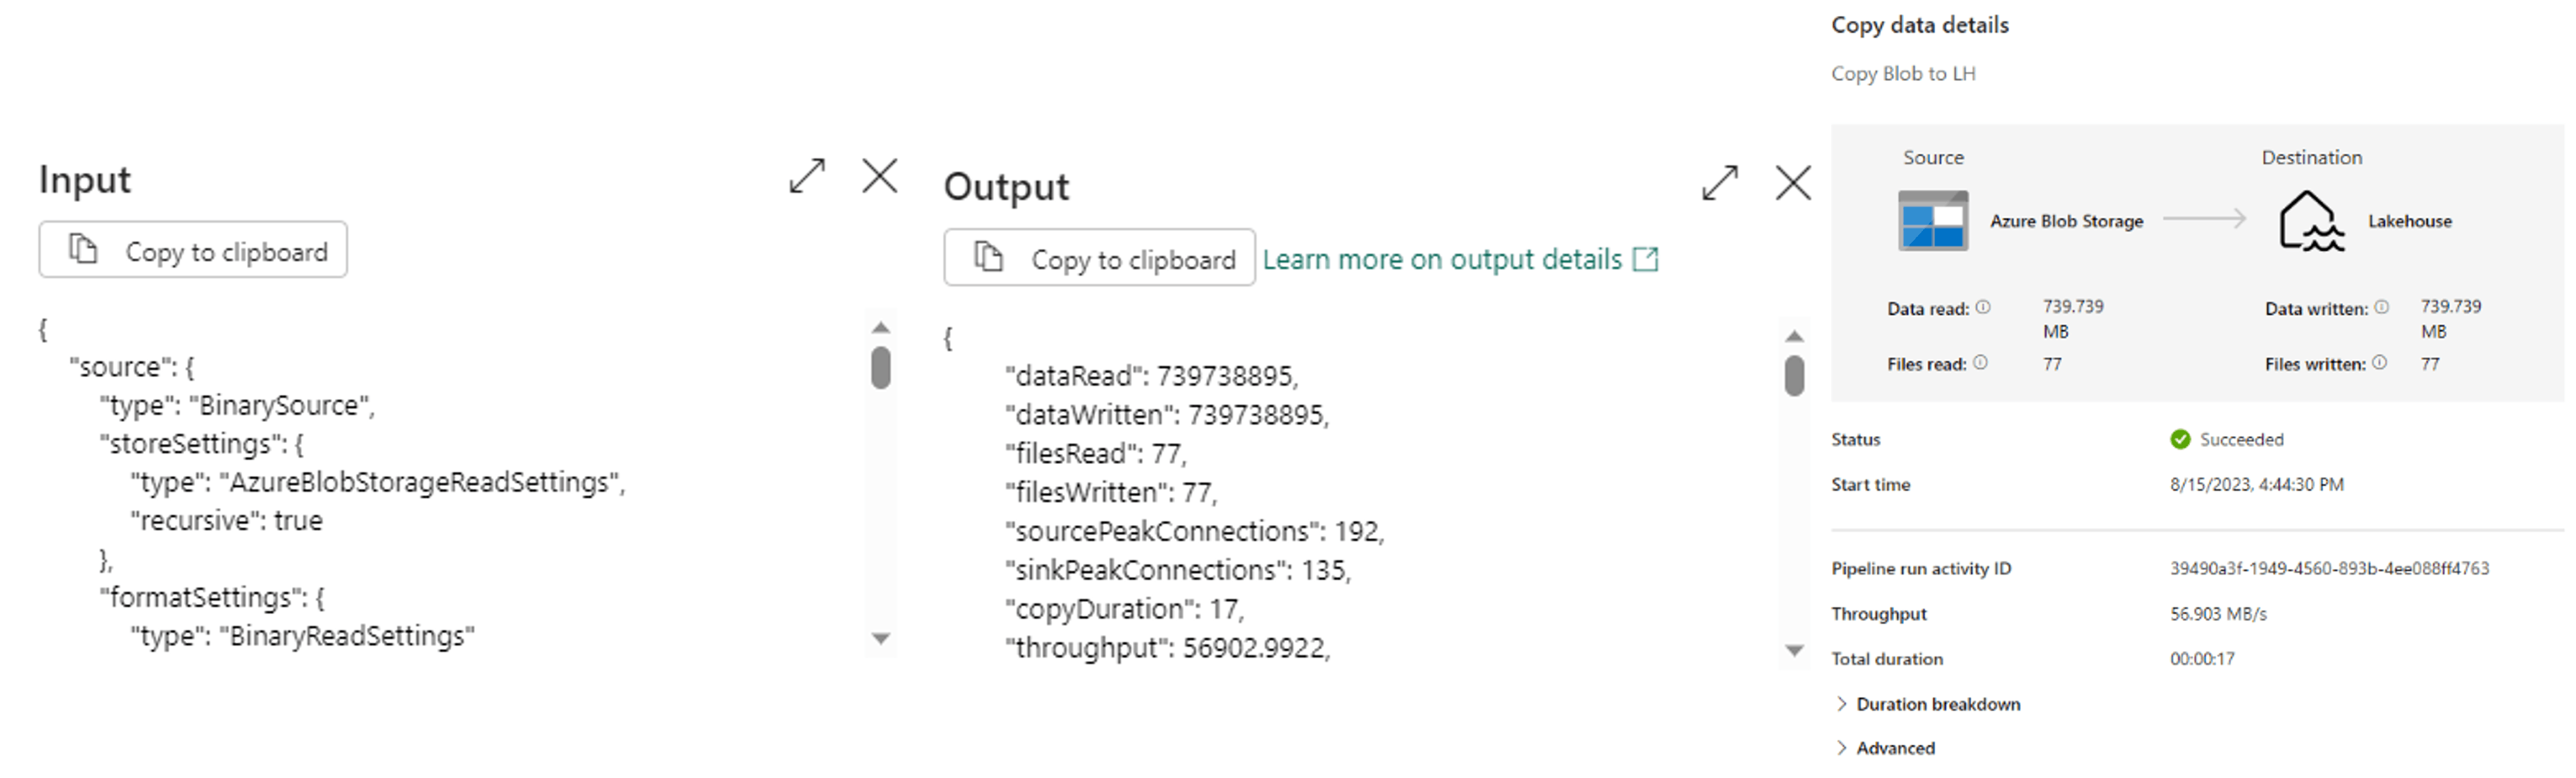 Input, output status and copy data details for your Microsoft Fabric data pipeline